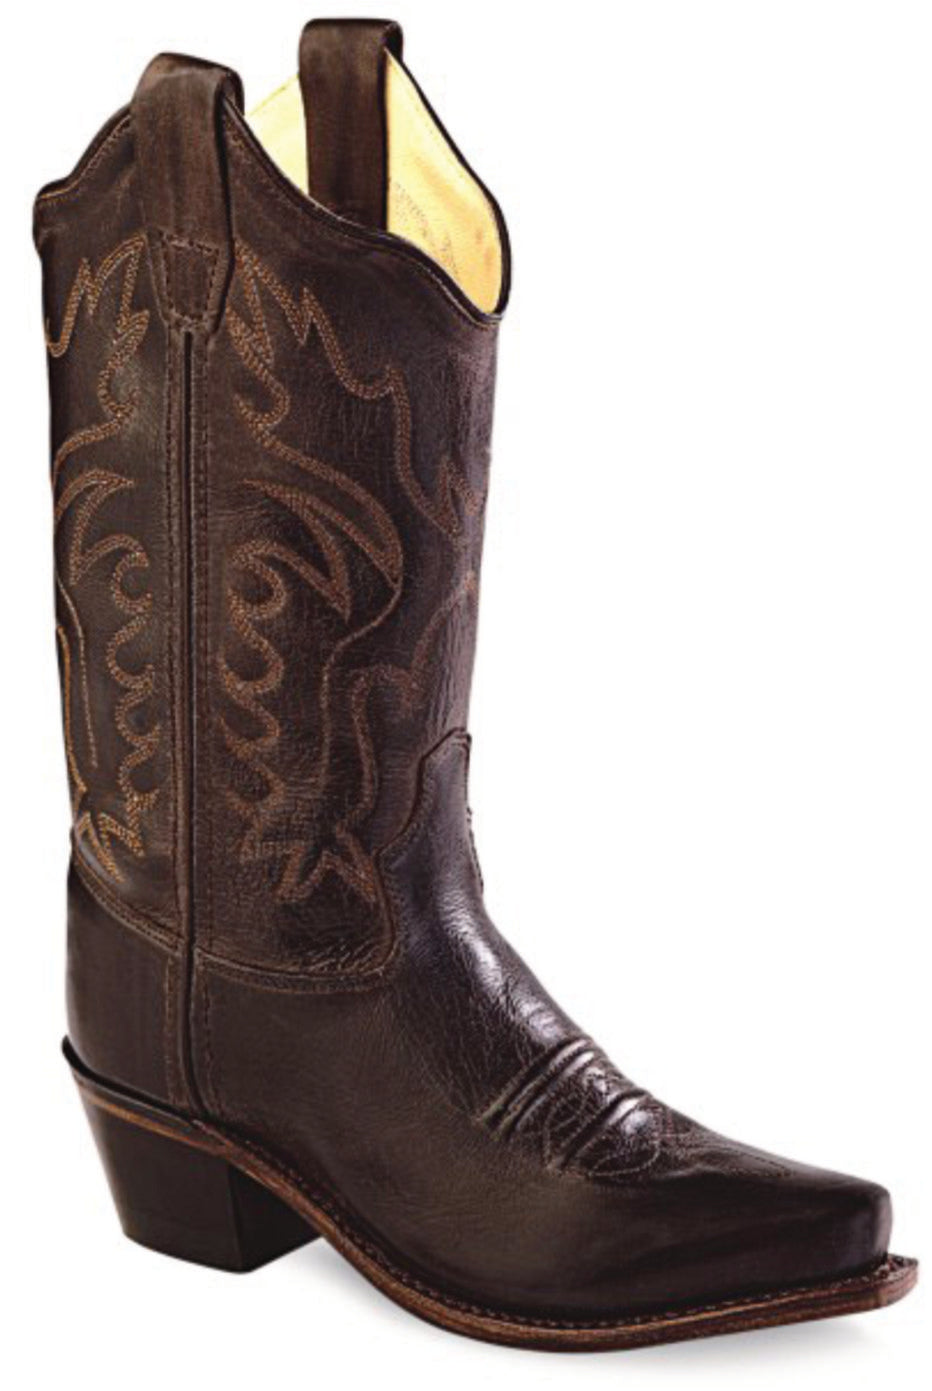 Jama Old West Children's & Youth Traditional Cowboy Boots Brown CF8234/Y